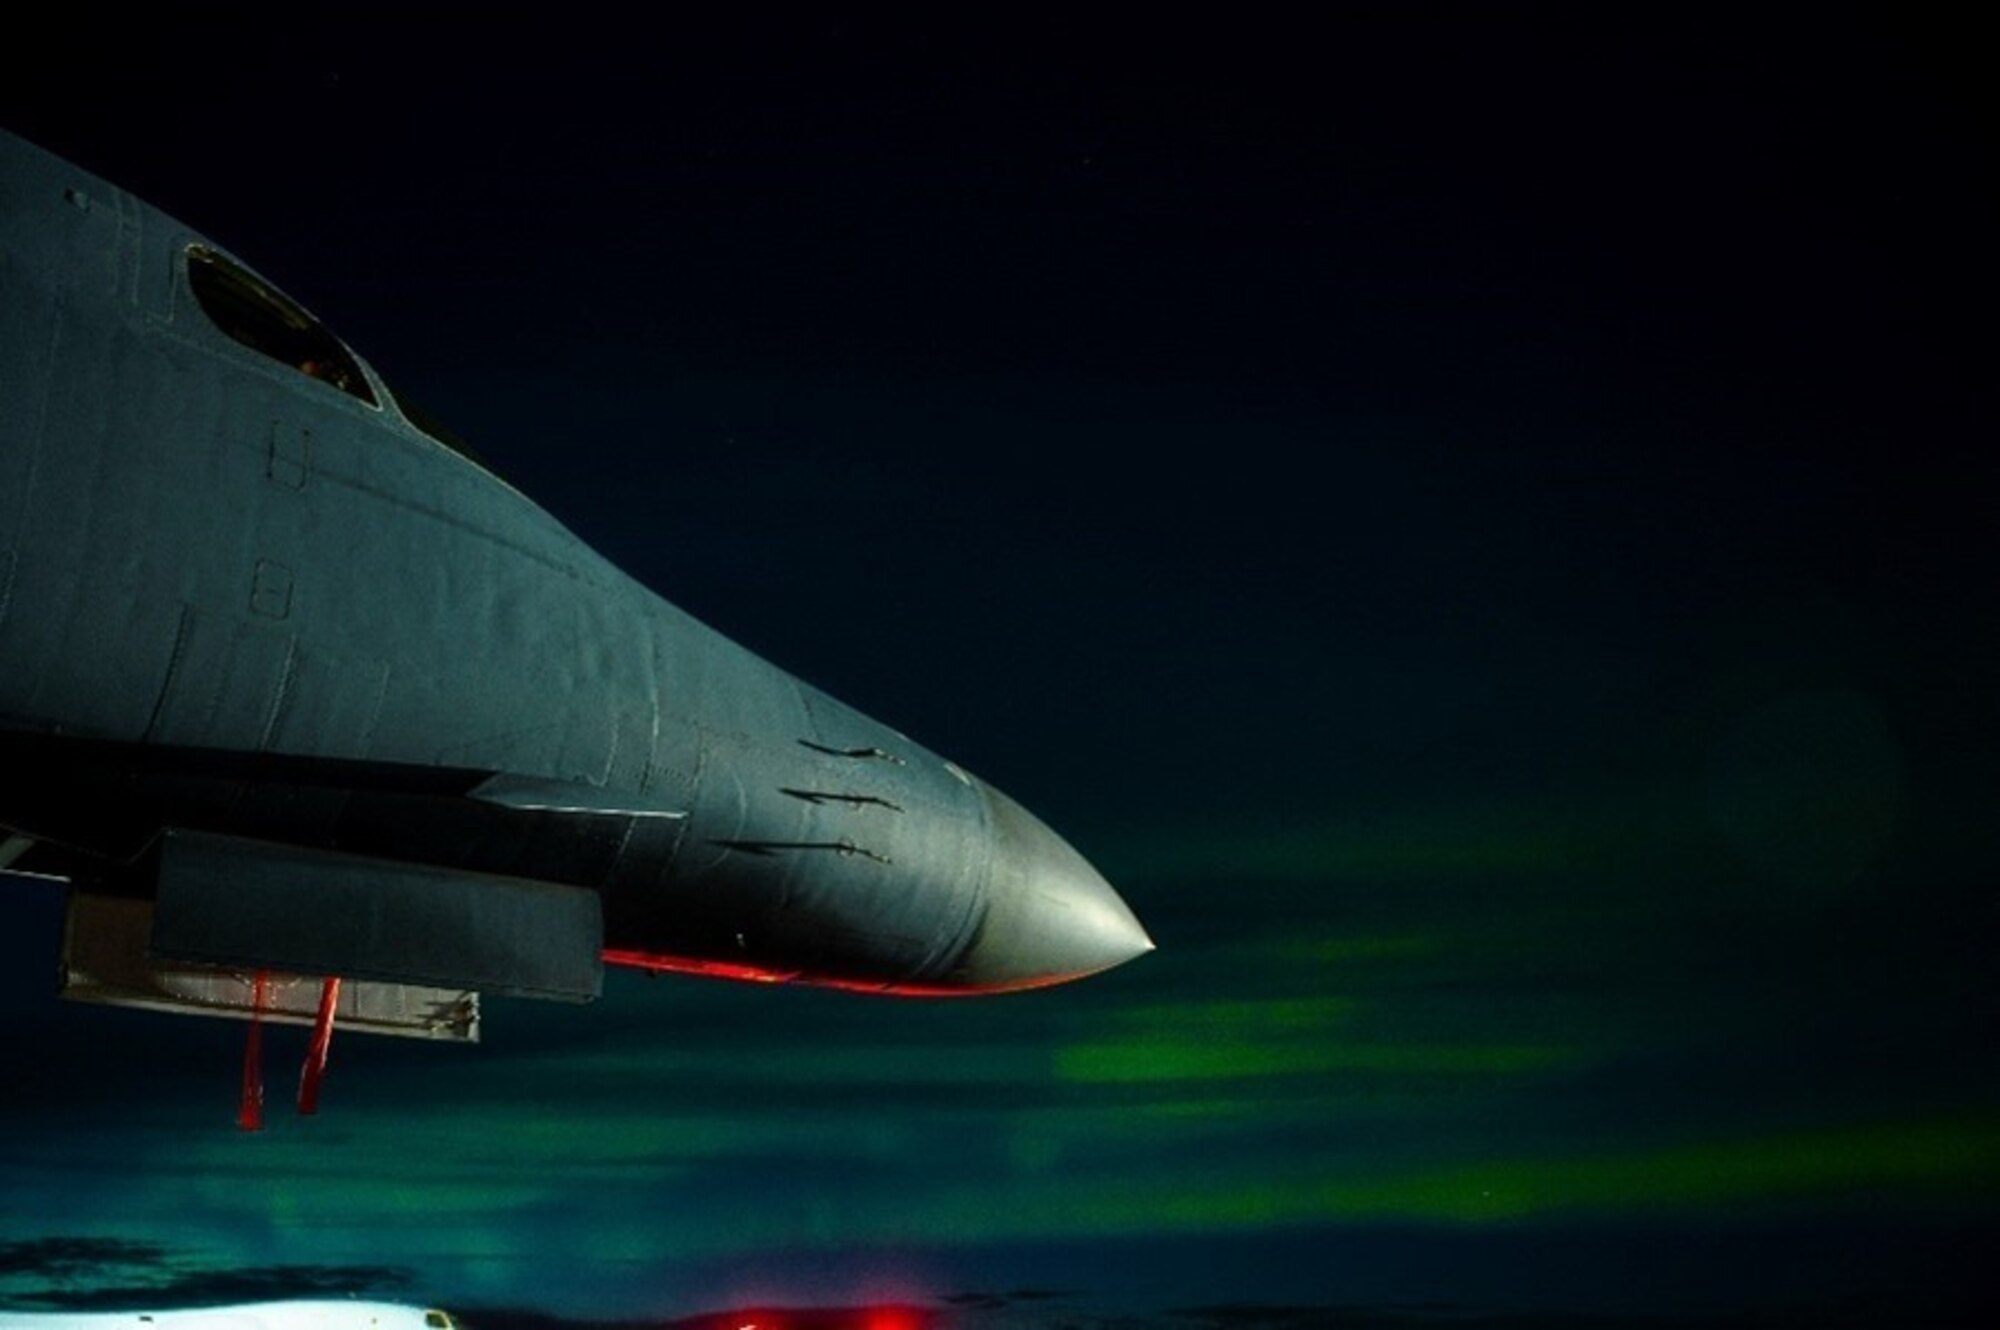 A B-1B Lancer assigned to the 7th Bomb Wing at Dyess Air Force Base, Texas, sits on the flightline at Eielson AFB, Alaska, during the Baked Alaskan exercise, Sept. 9, 2022. One of the key objectives of this mission was to operationalize the Agile Combat Employment concept by sending Dyess Airmen to a different region. It also employed Multi Capable Airman construct, where Airmen were tasked with fulfilling multiple duties outside of their traditional Air Force Specialty Code on the flightline. (U.S. Air Force photo by Senior Airman Colin Hollowell)